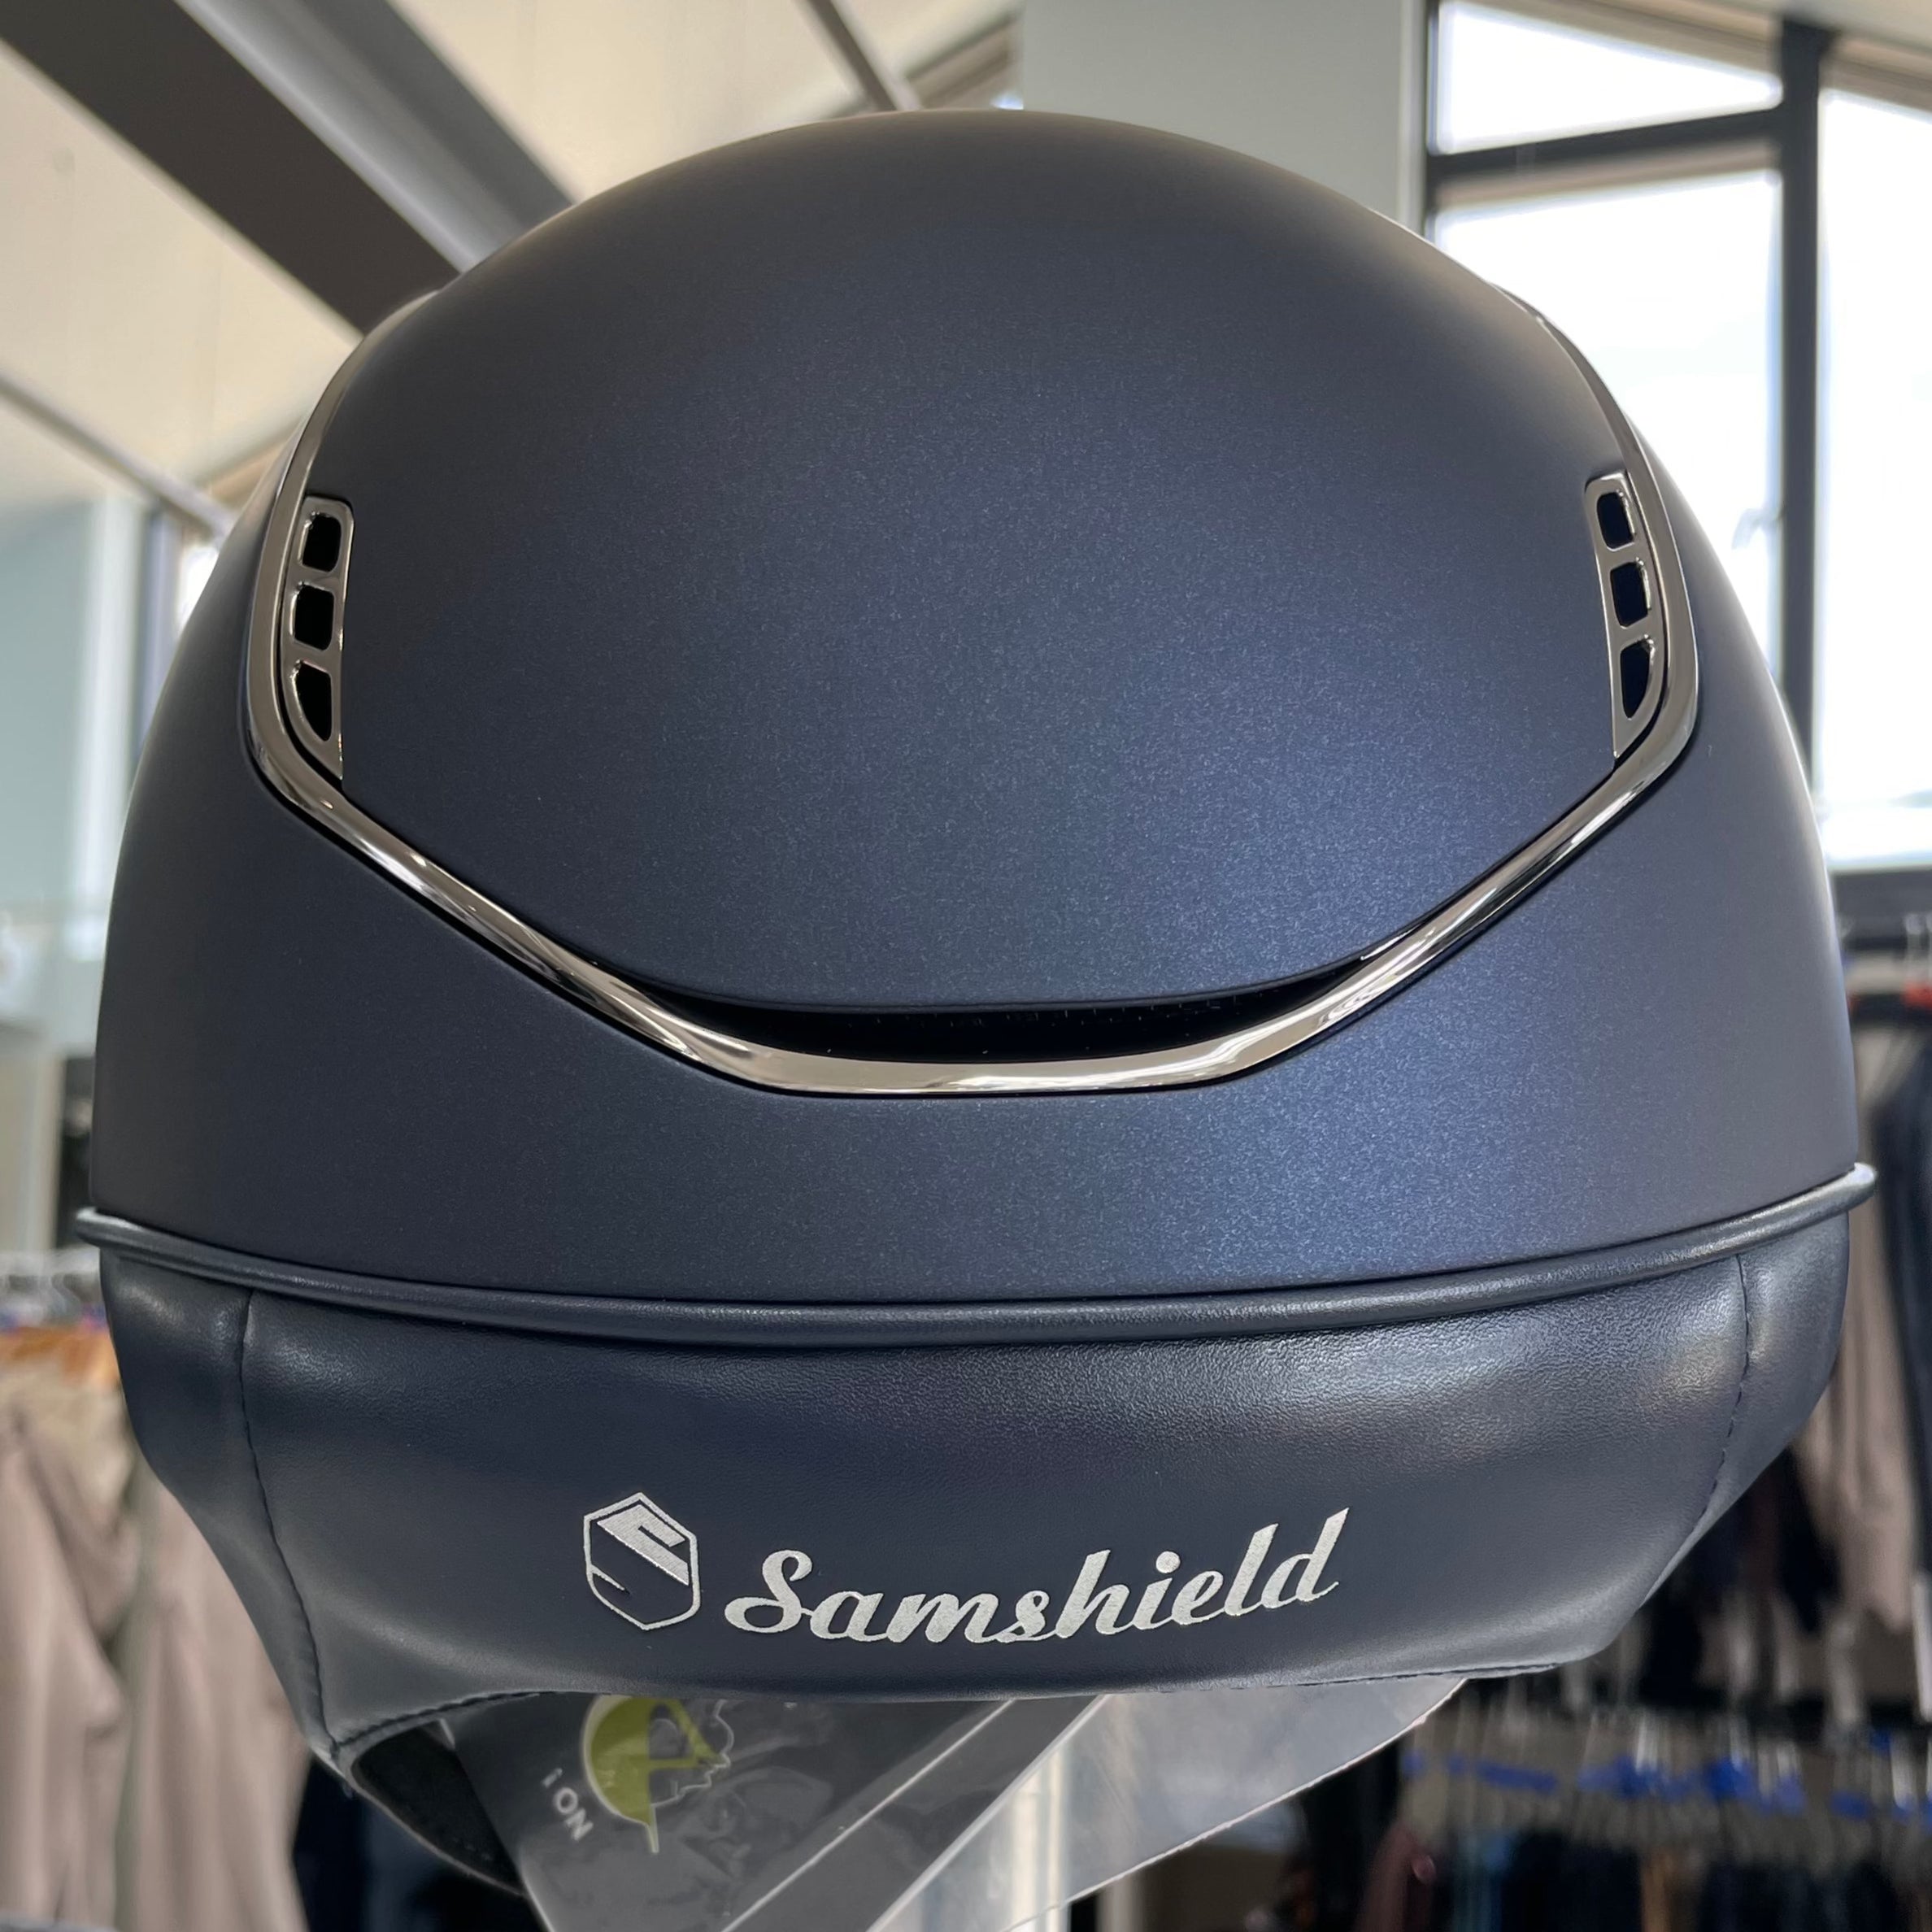 Samshield MissShield Blue with paradise shine badge and frontal band 2.0 L- in stock and ready to ship!